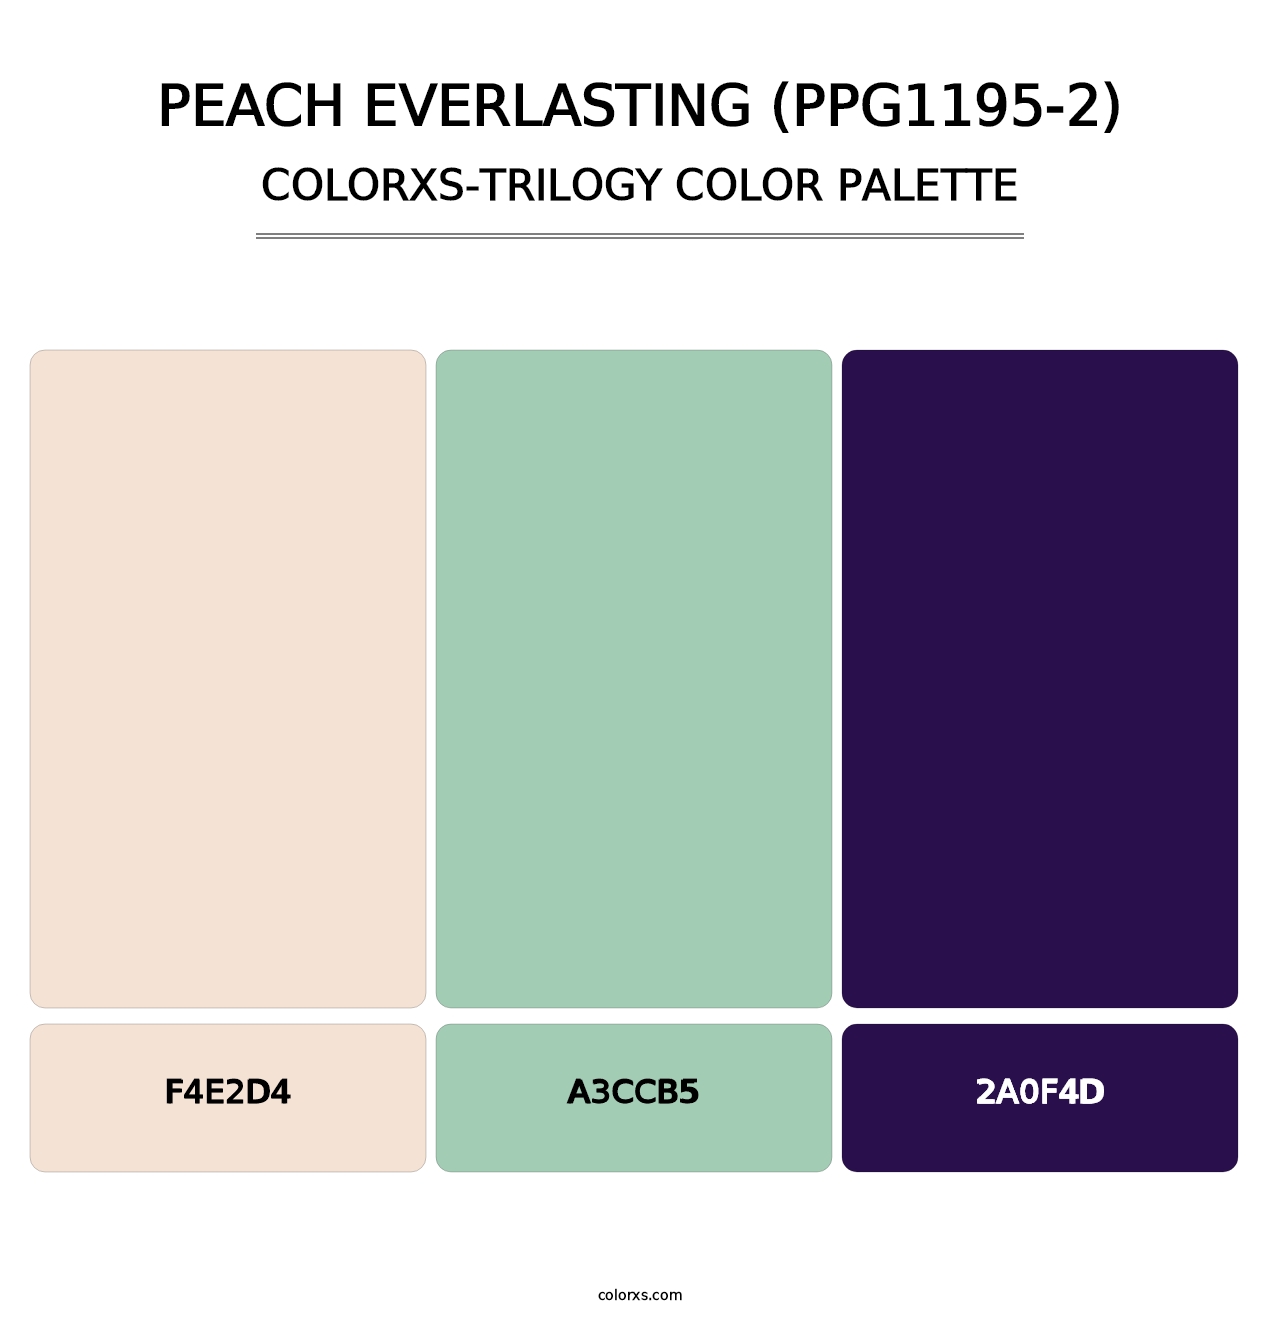 Peach Everlasting (PPG1195-2) - Colorxs Trilogy Palette